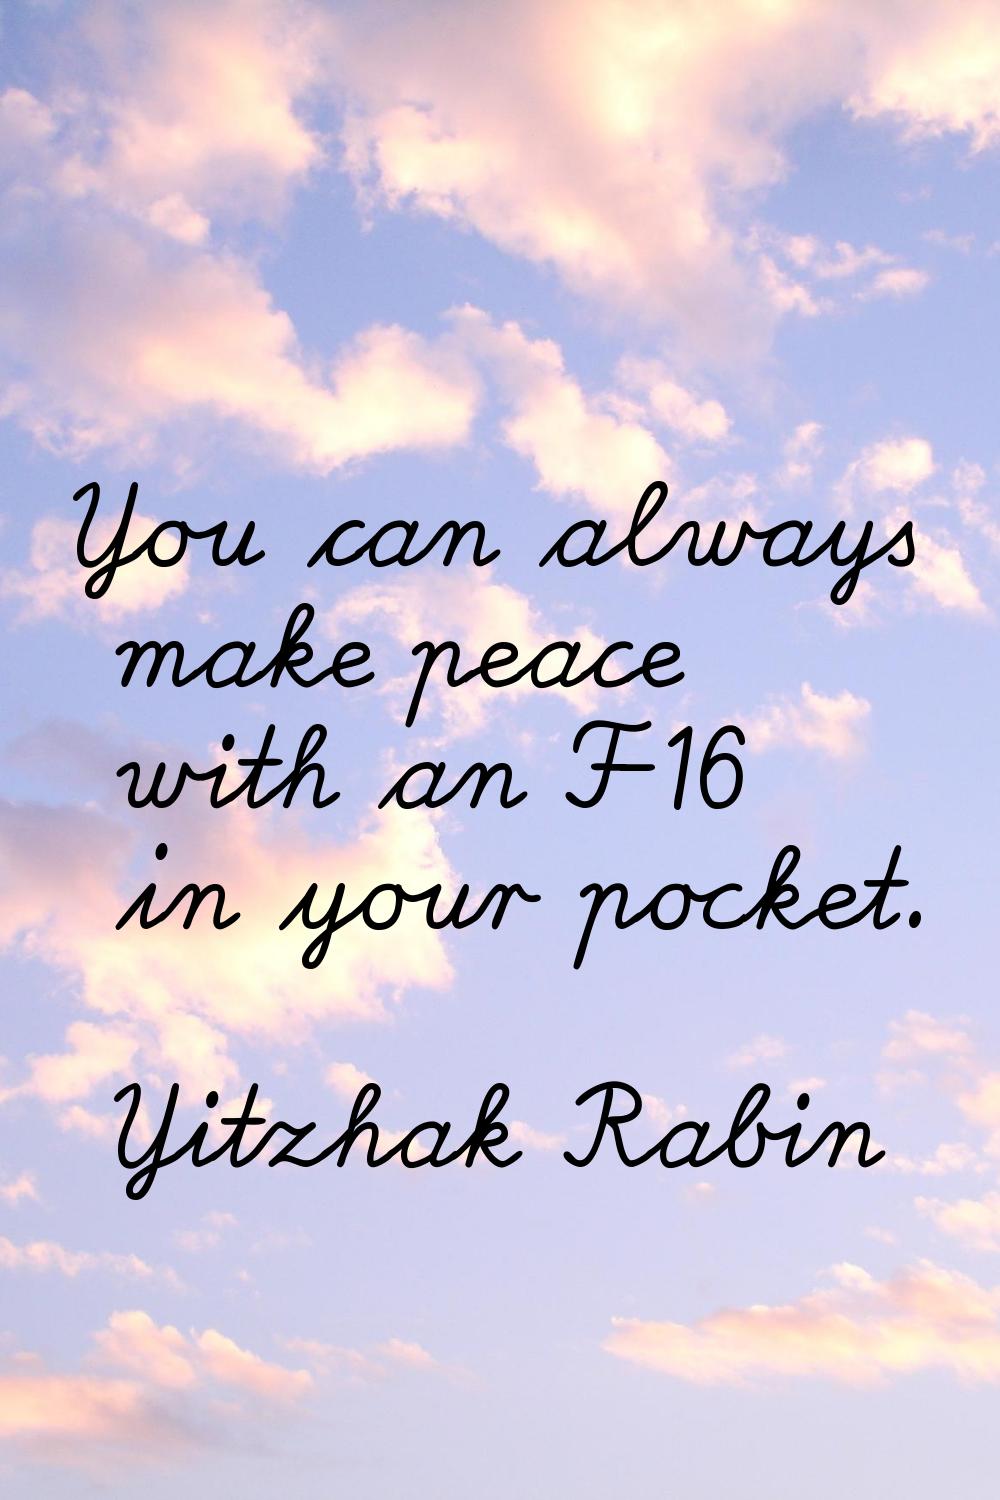 You can always make peace with an F-16 in your pocket.